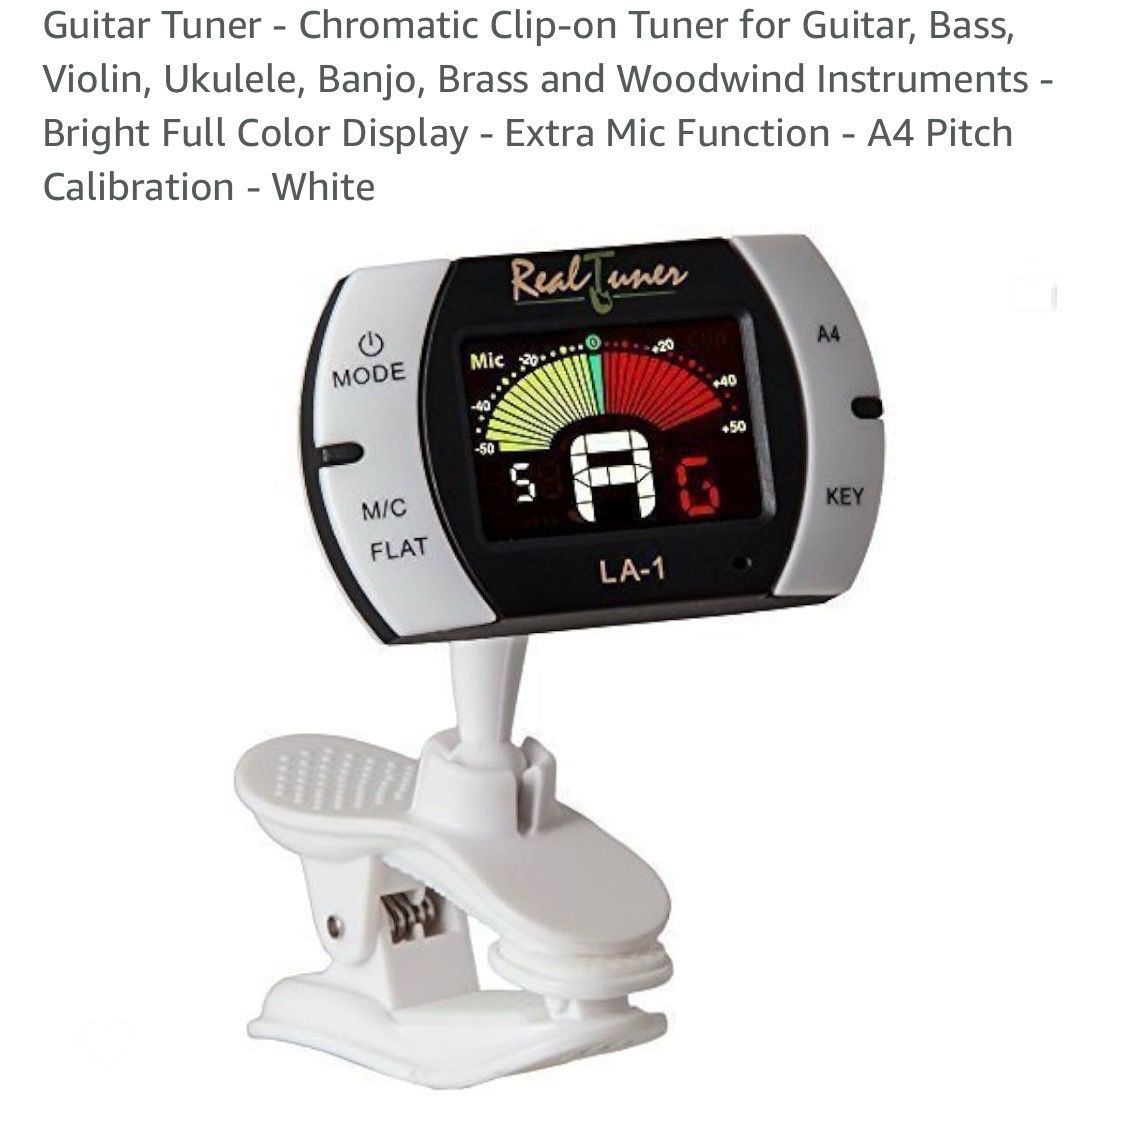 Guitar Tuner - Chromatic Clip-on Tuner for Guitar, Bass, Violin, Ukulele, Banjo, Brass and Woodwind Instruments - Bright Full Color Display - Extra Mi